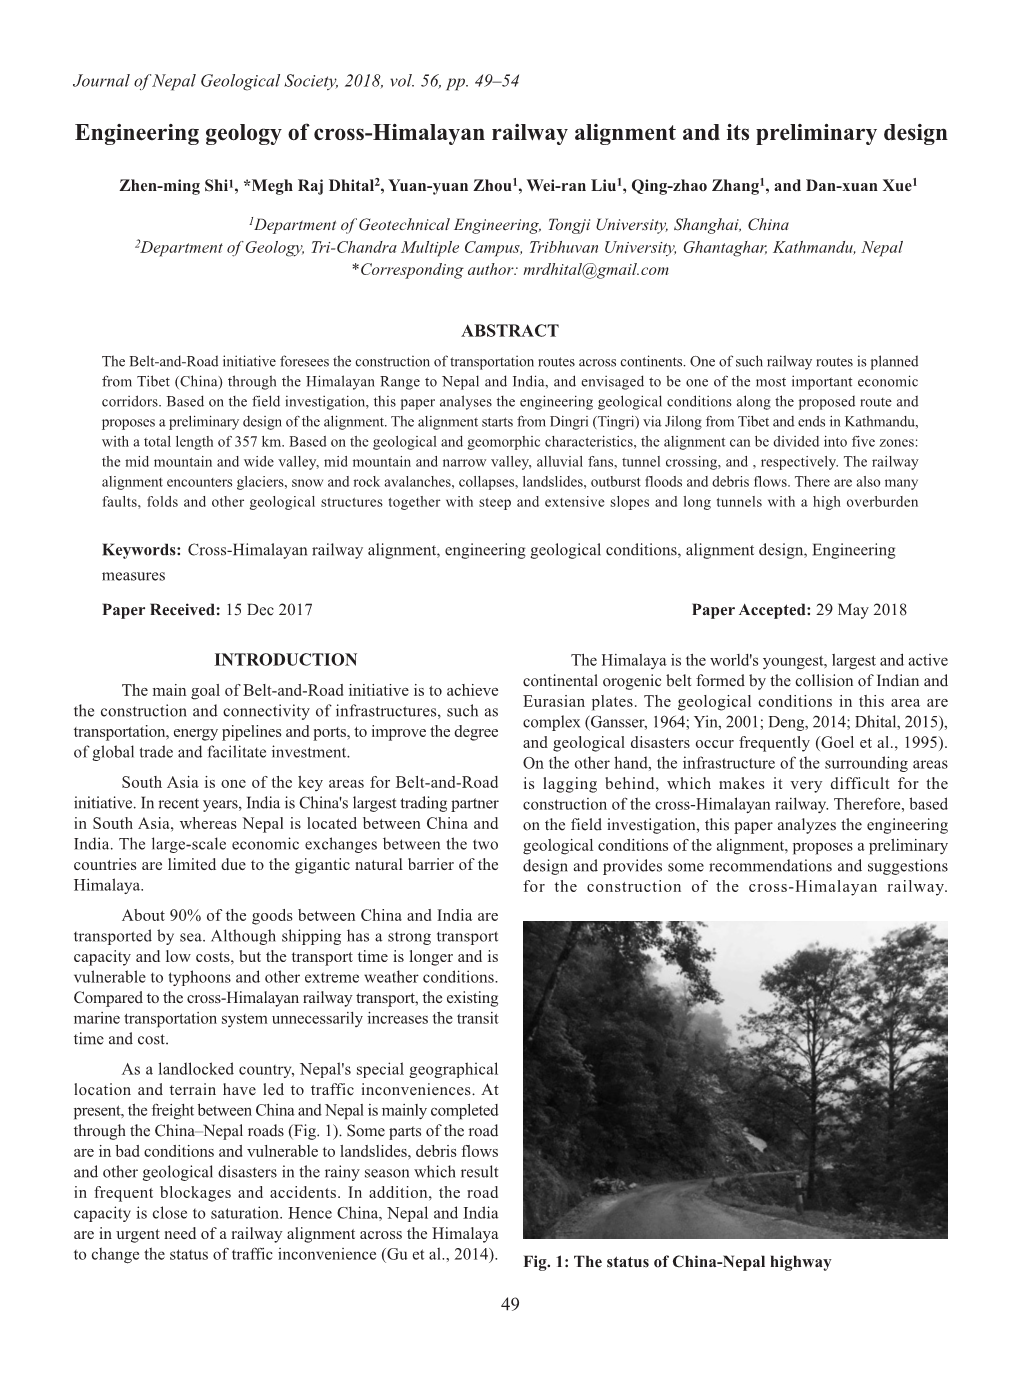 Engineering Geology of Cross-Himalayan Railway Alignment and Its Preliminary Design